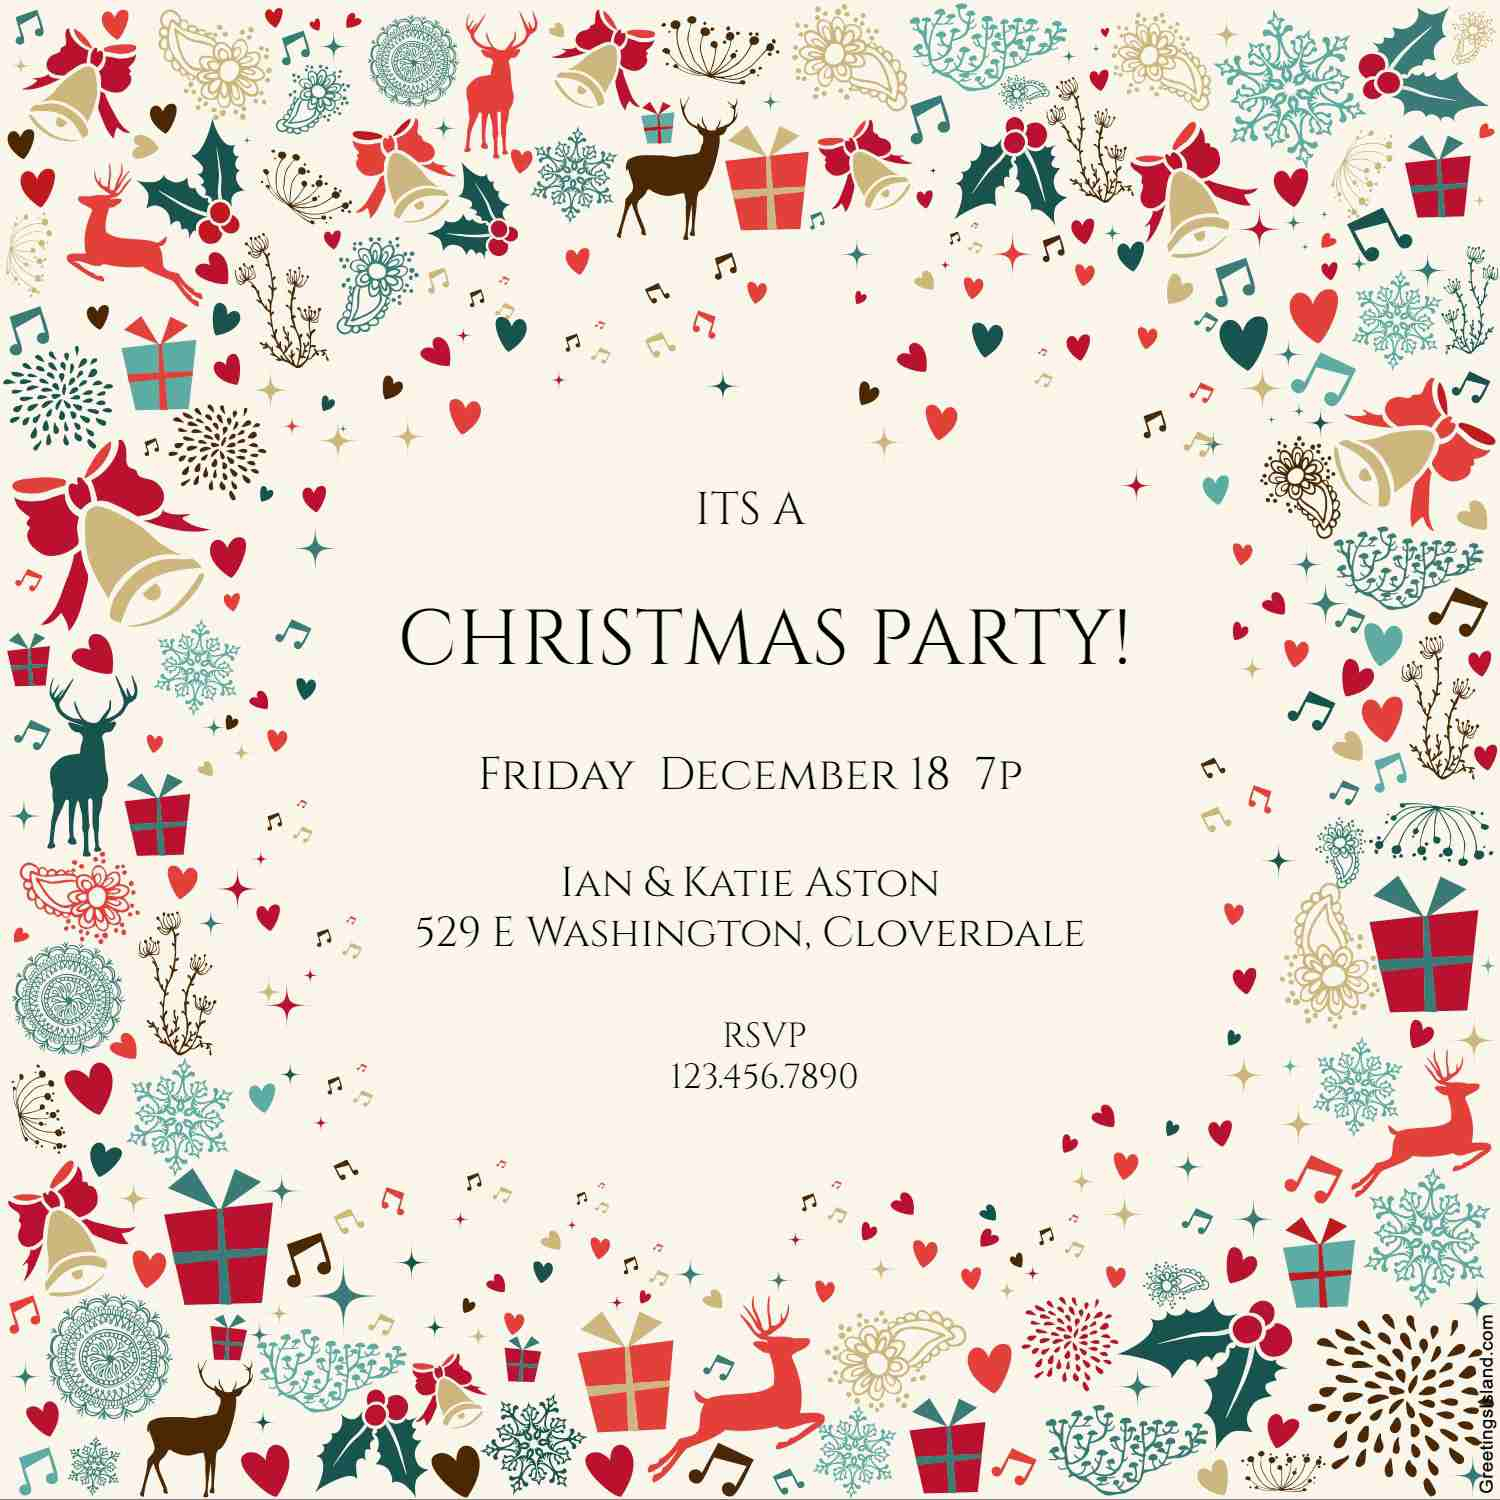 10 Free Christmas Party Invitations That You Can Print - Free Printable Christmas Party Invitations